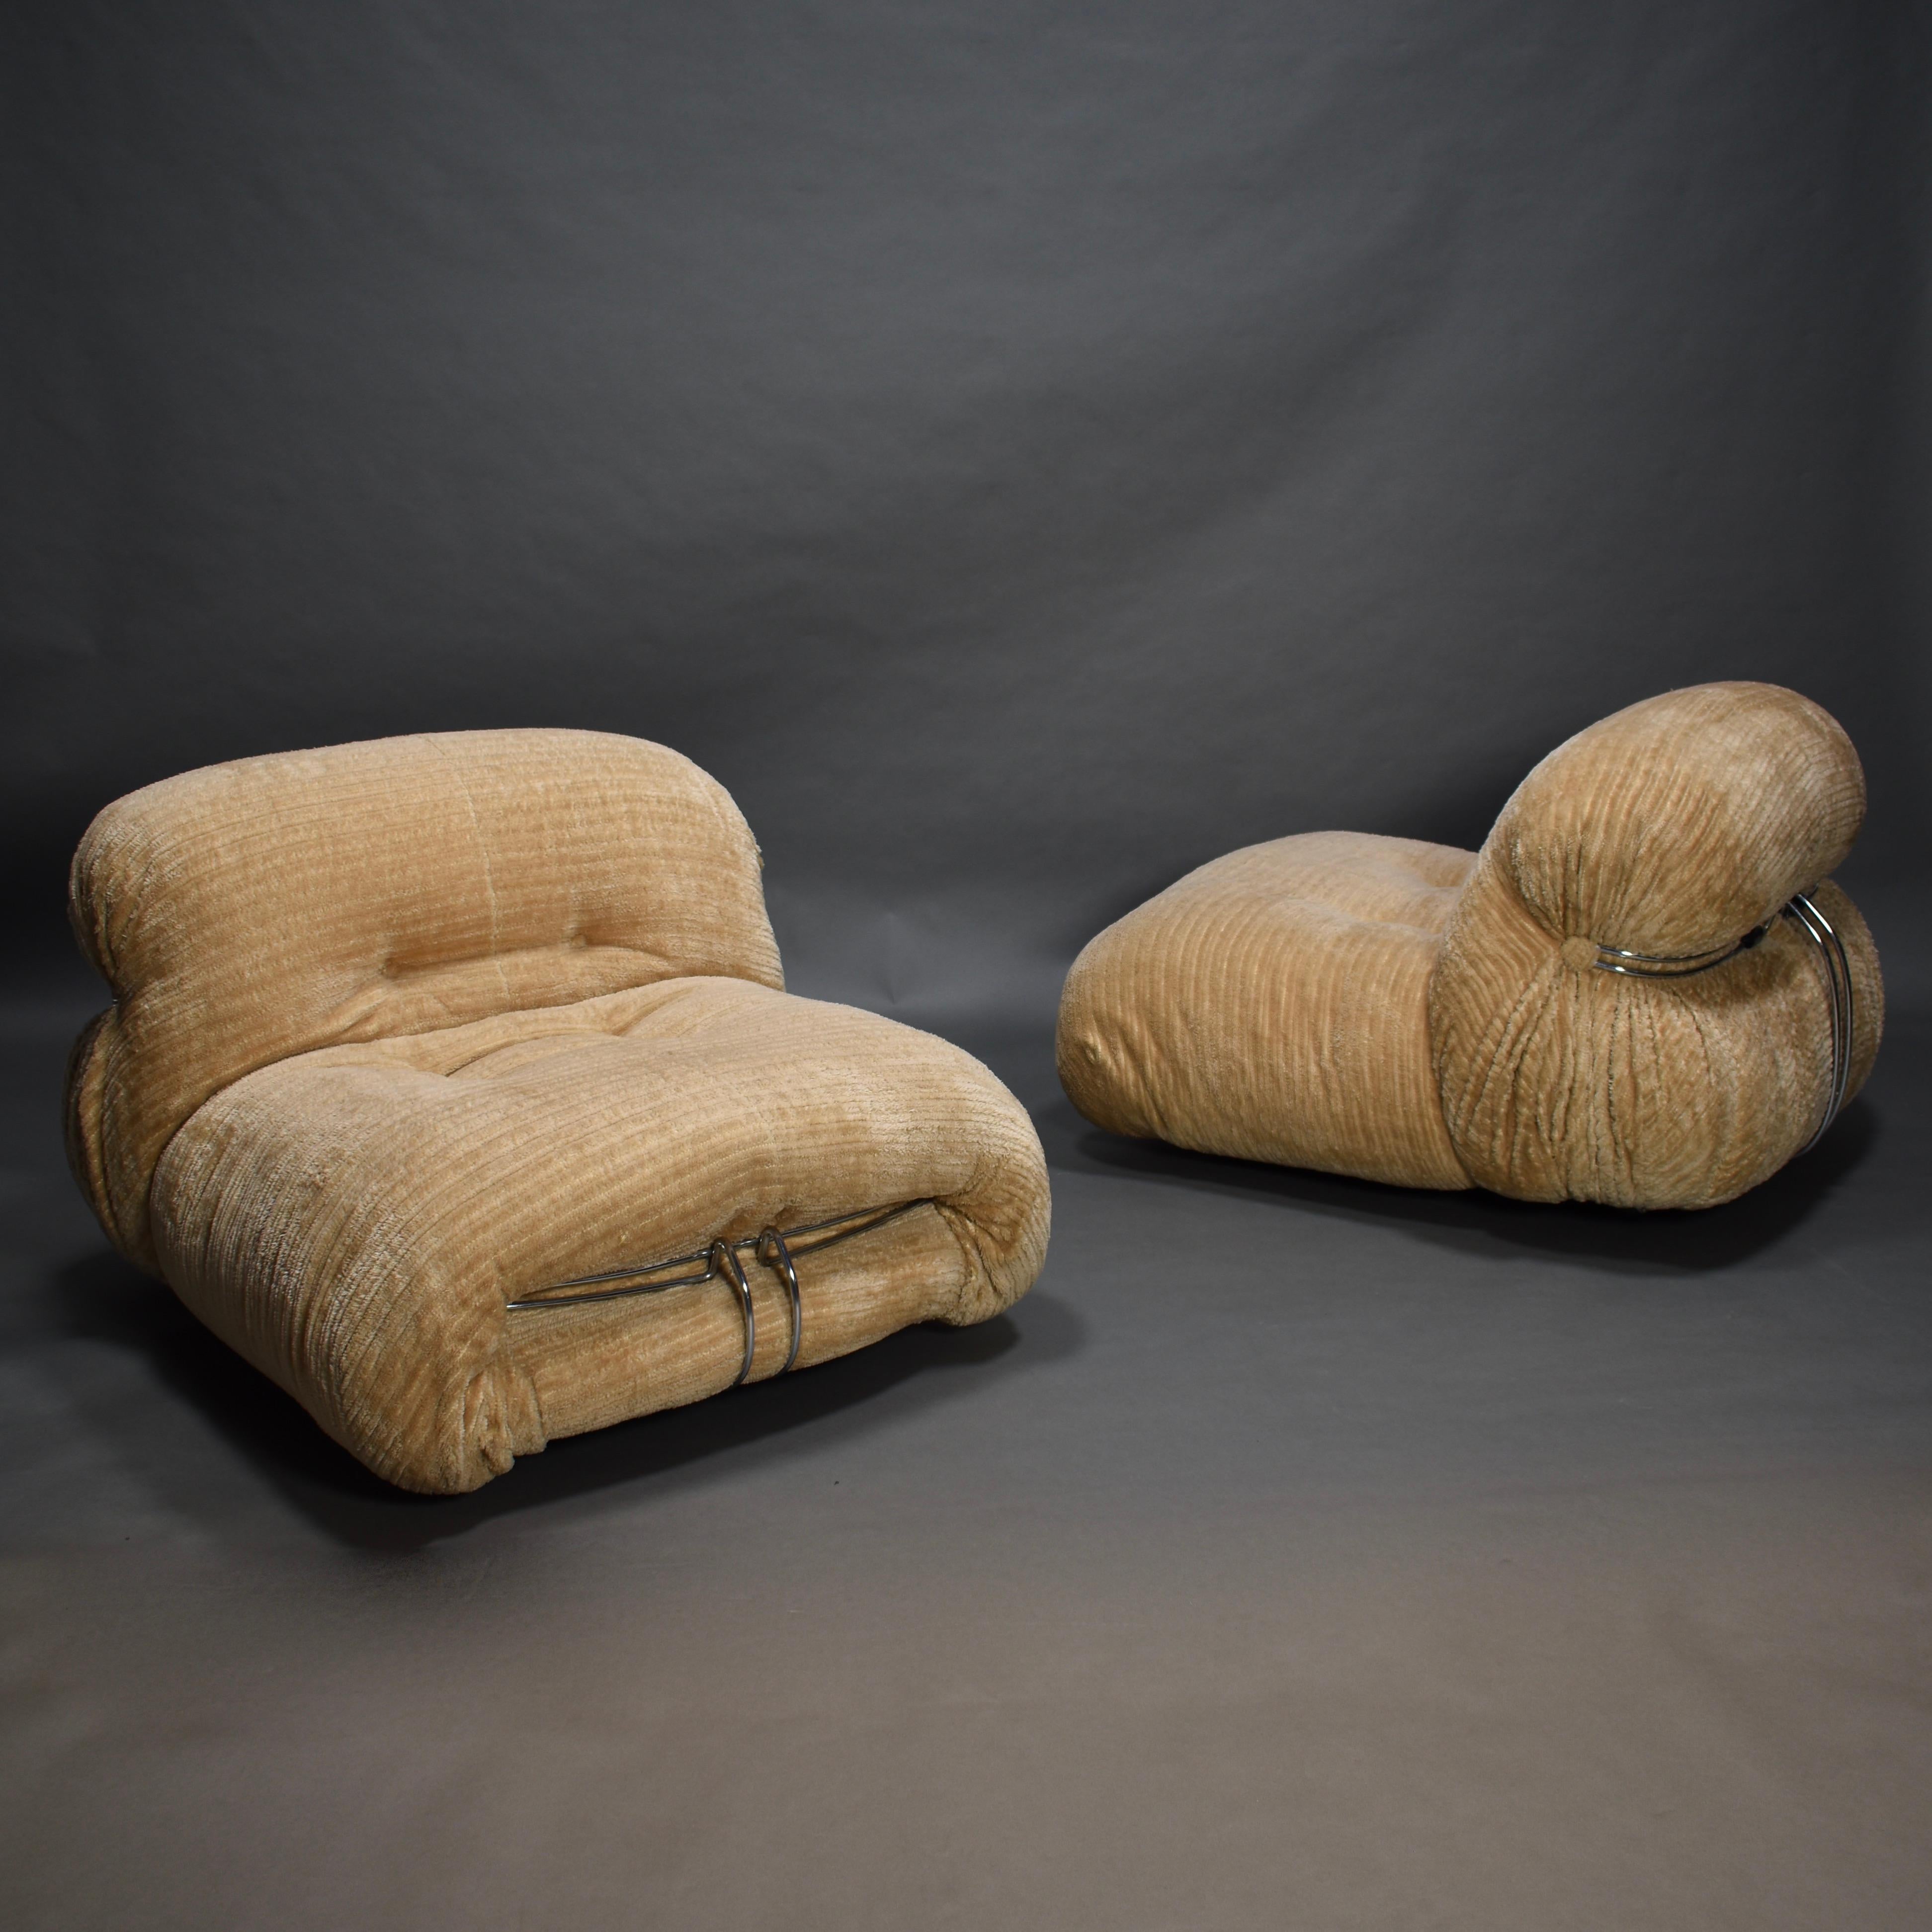 Pair of Soriana chairs by Afra and Tobia Scarpa for Cassina, Italy, circa 1970.
The chairs still have their original plush wool fabric and although certainly not necessary new upholstery is possible on request. The fabric is a dark champagne color.